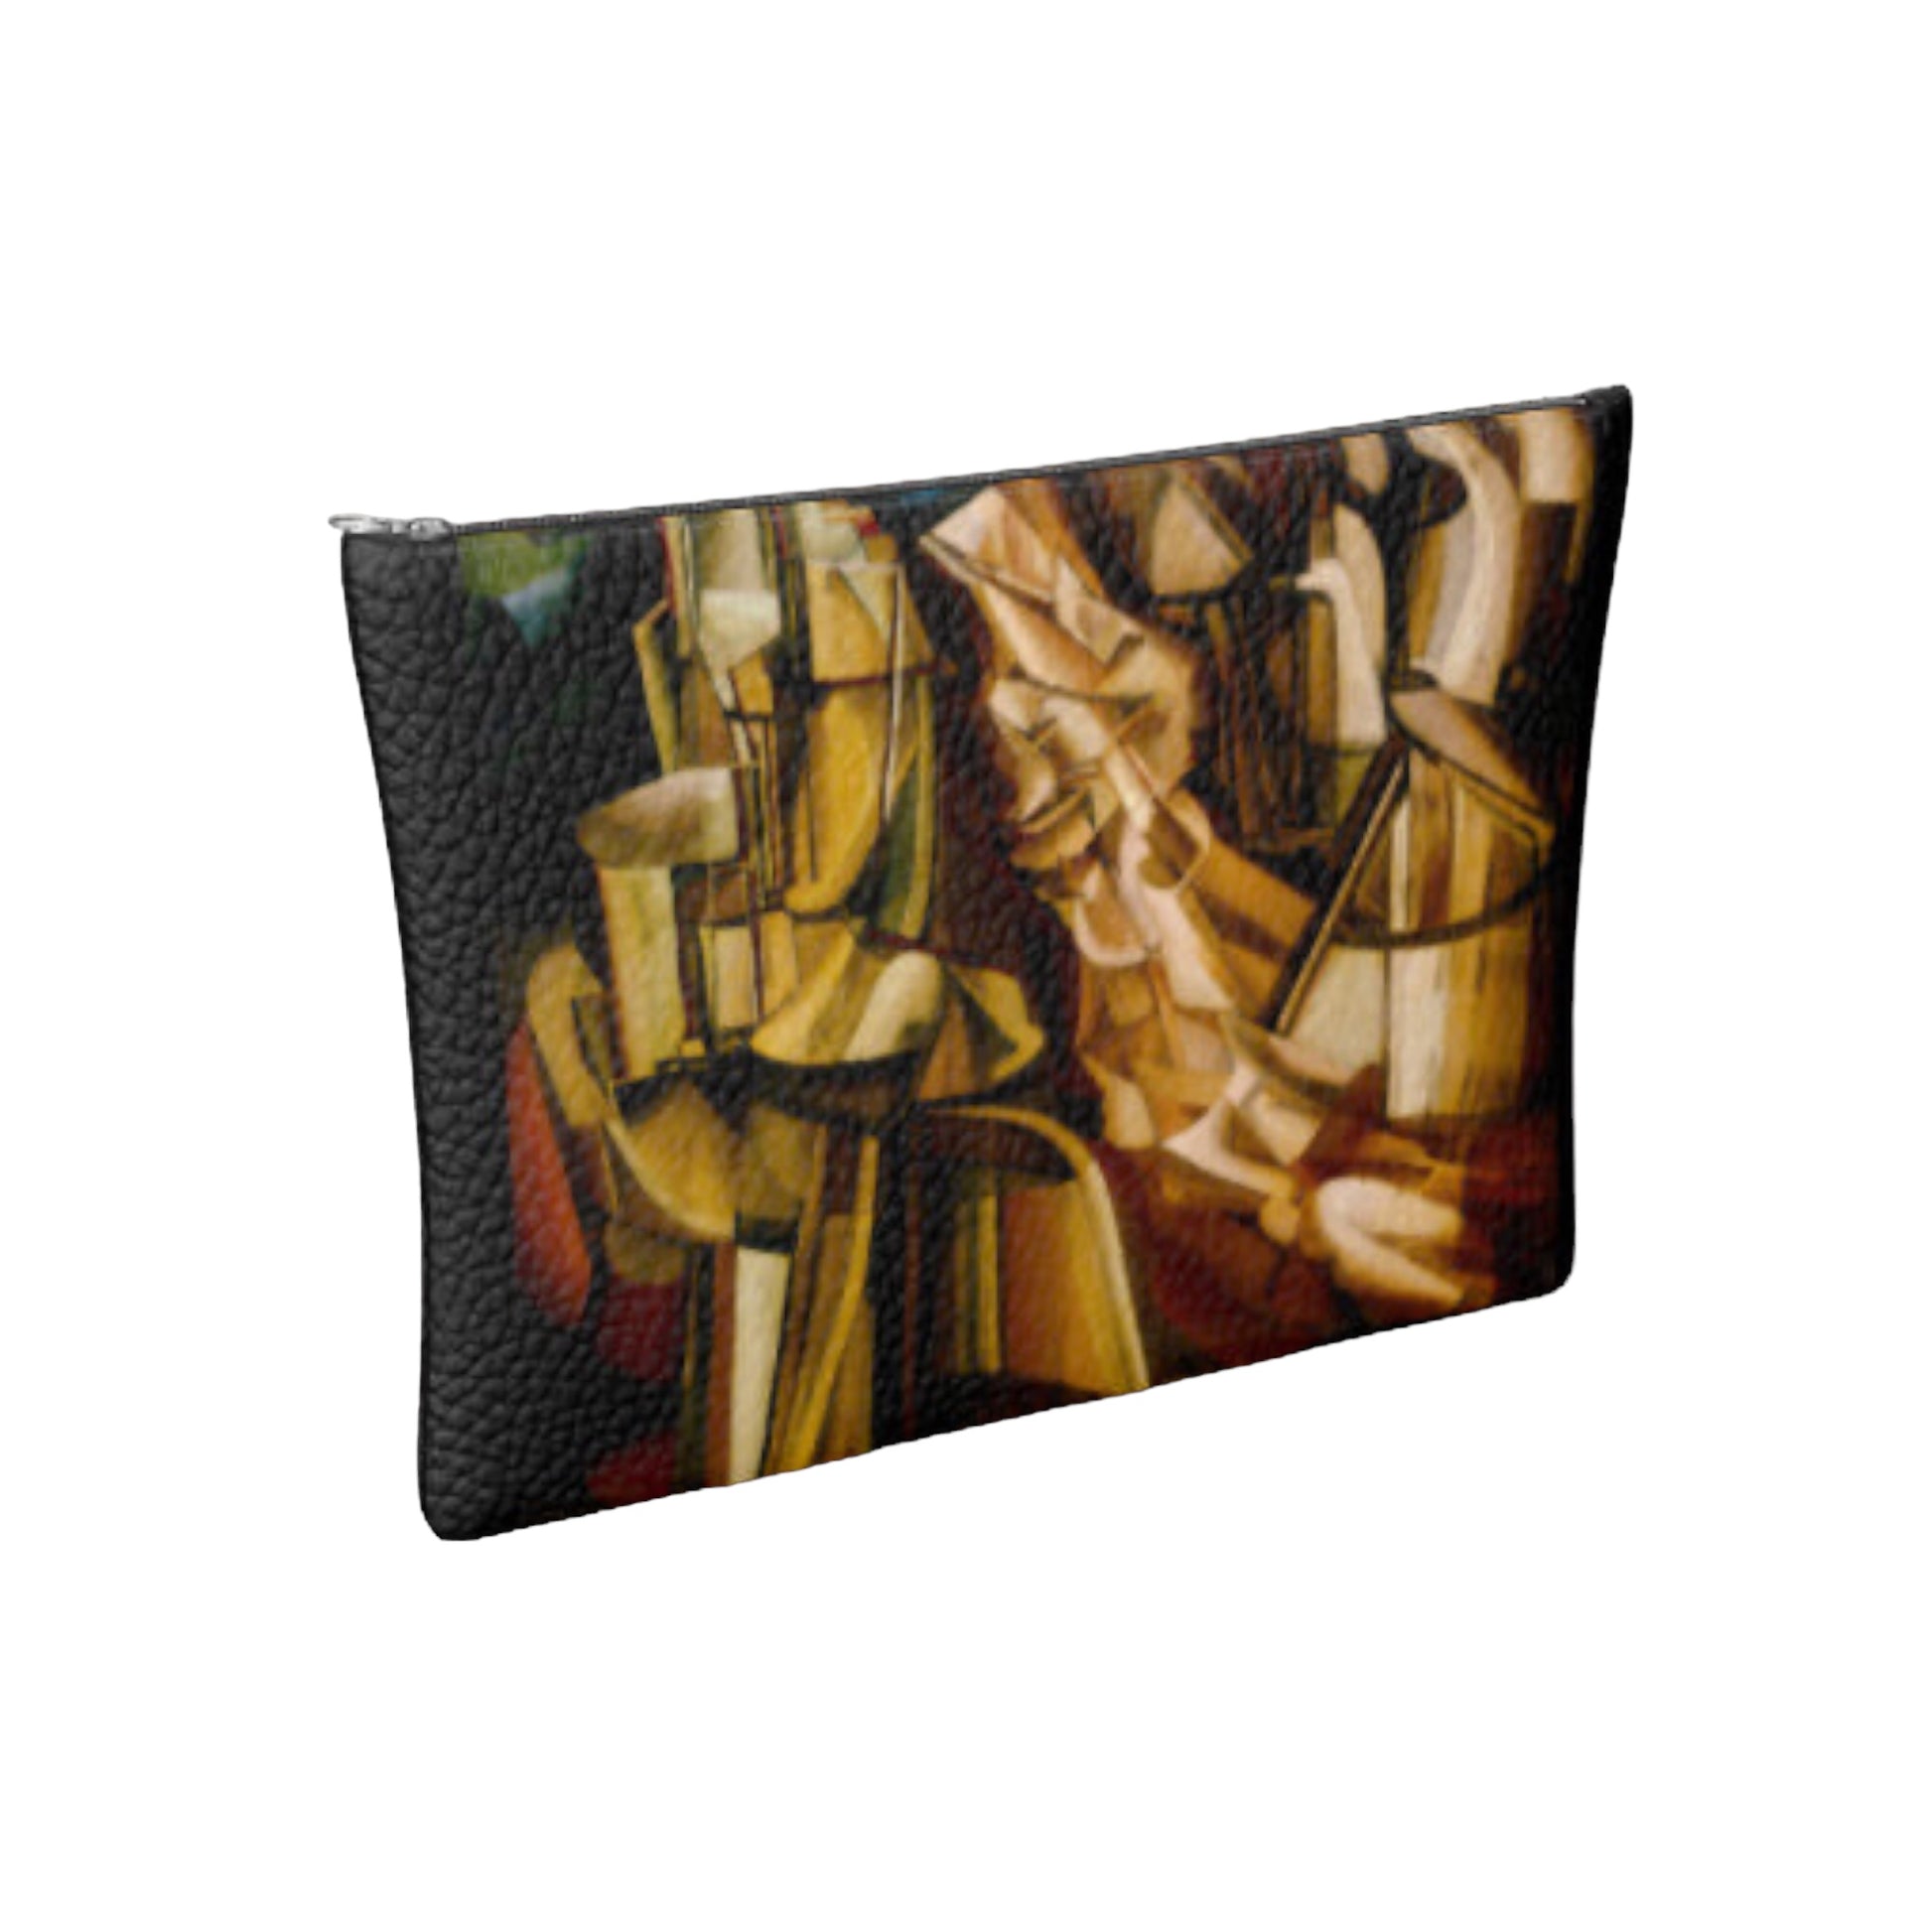 MARCEL DUCHAMP - KING AND QUEEN SURROUNDED BY SWIFT NUDES - LEATHER CLUTCH